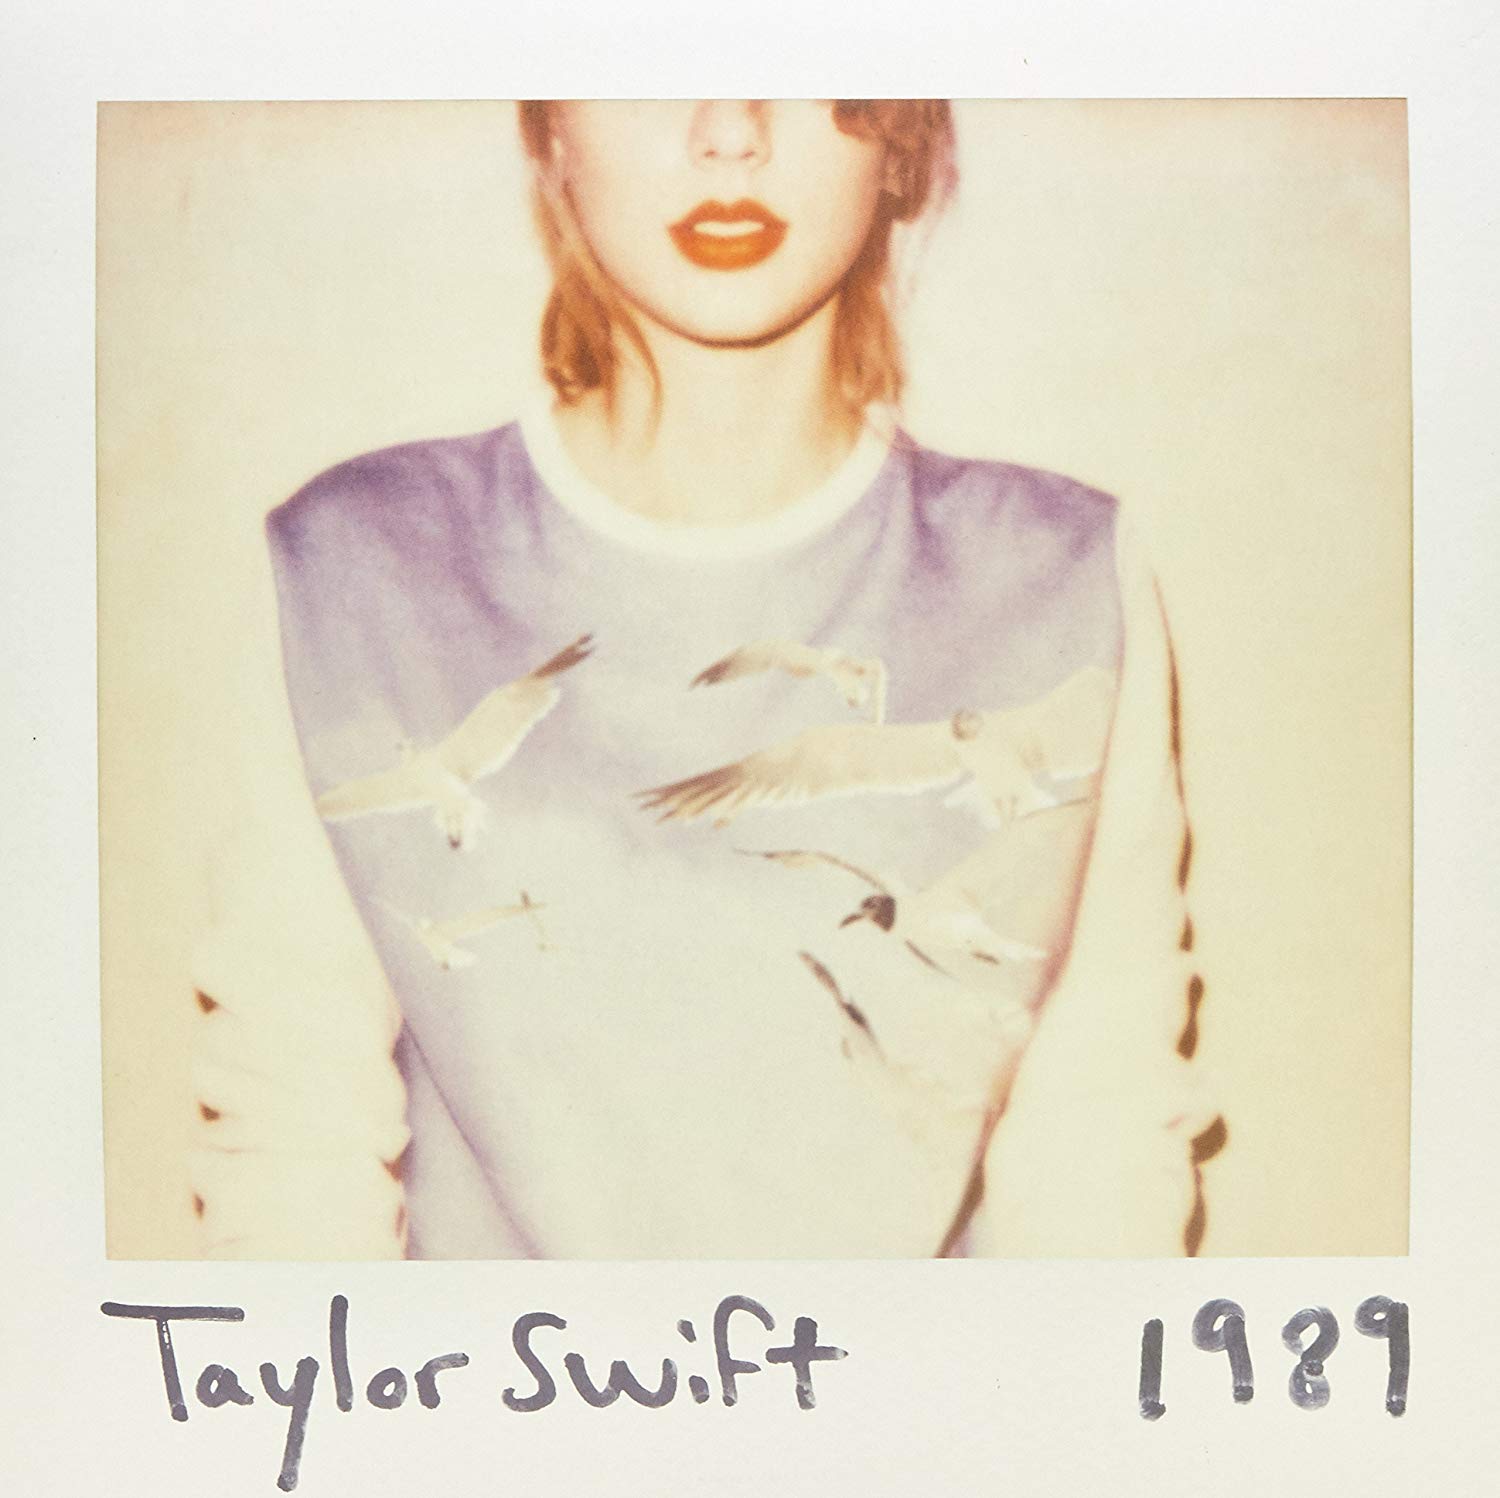 billboard-200-taylor-swift-s-1989-returns-to-the-top-10-for-the-first-time-since-2016-that